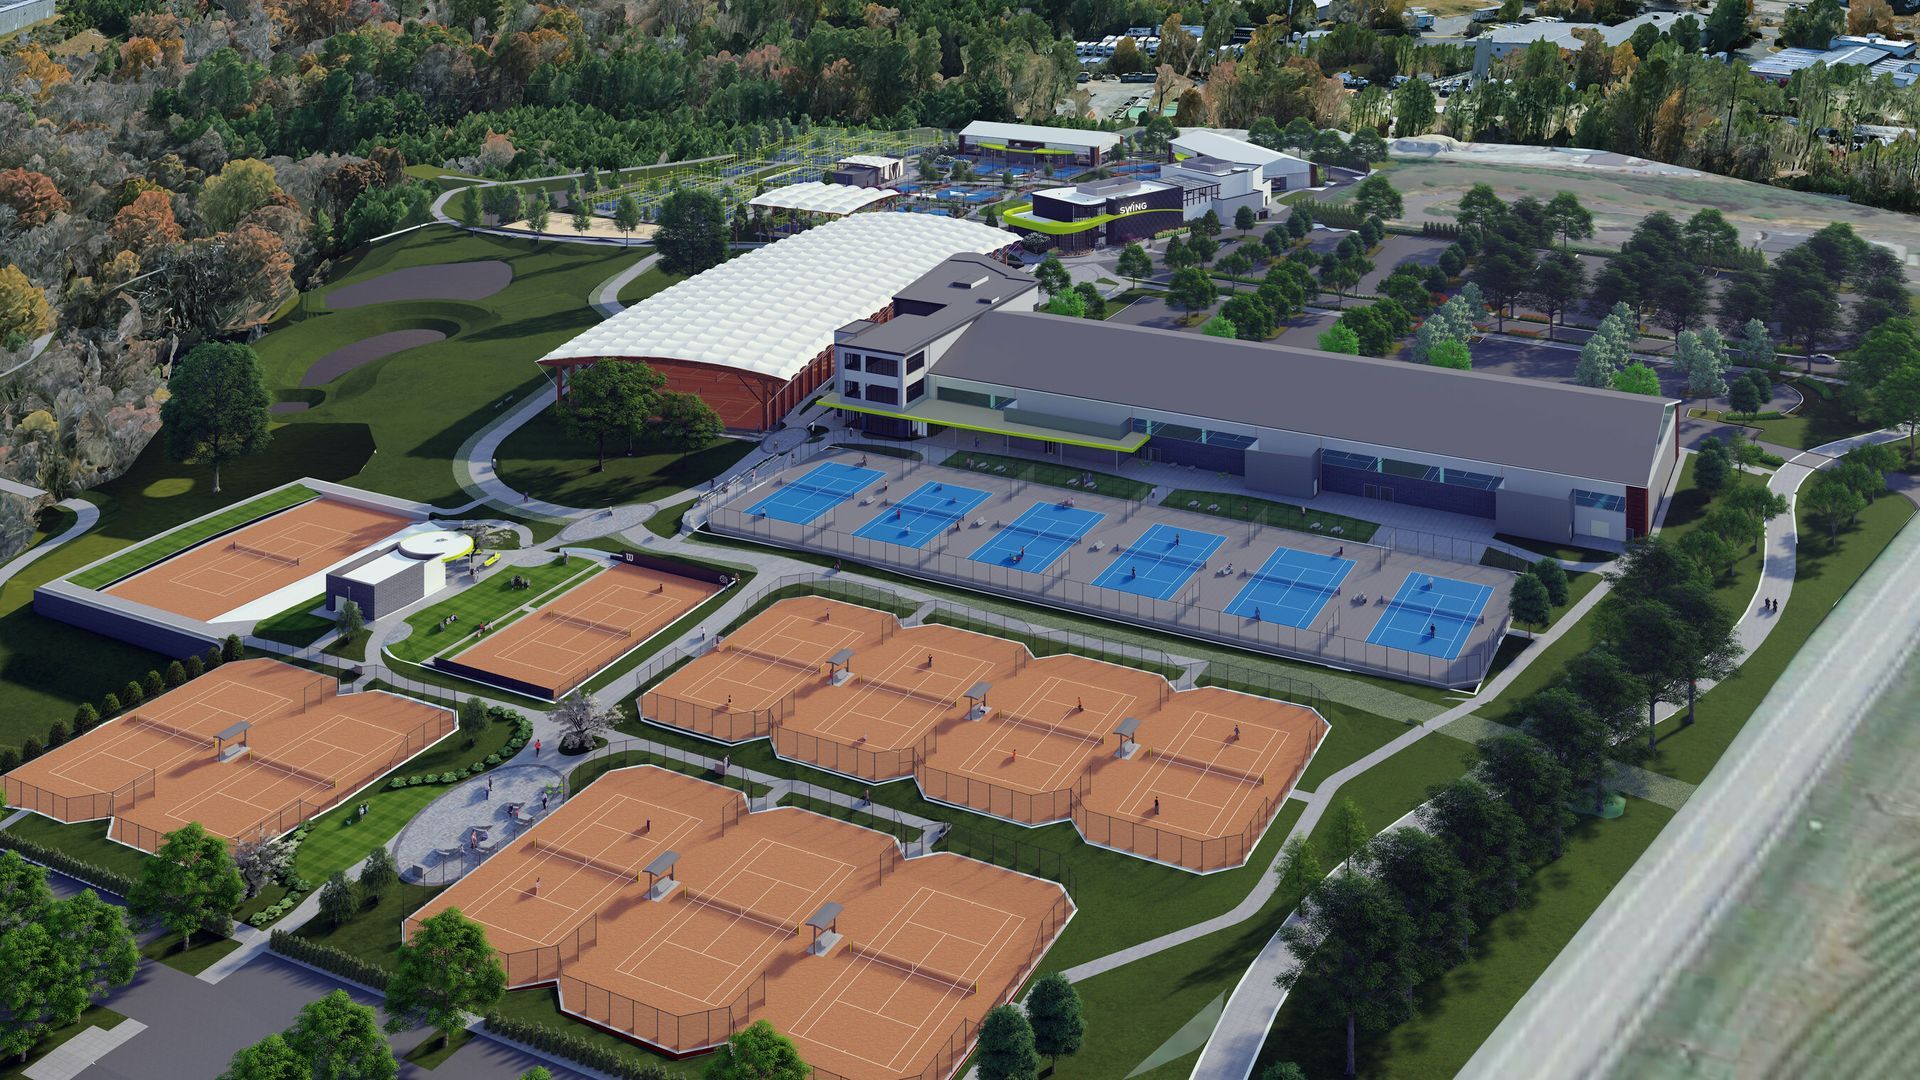 
World's Largest Racquet Sports Complex, world record in Raleigh, North Carolina